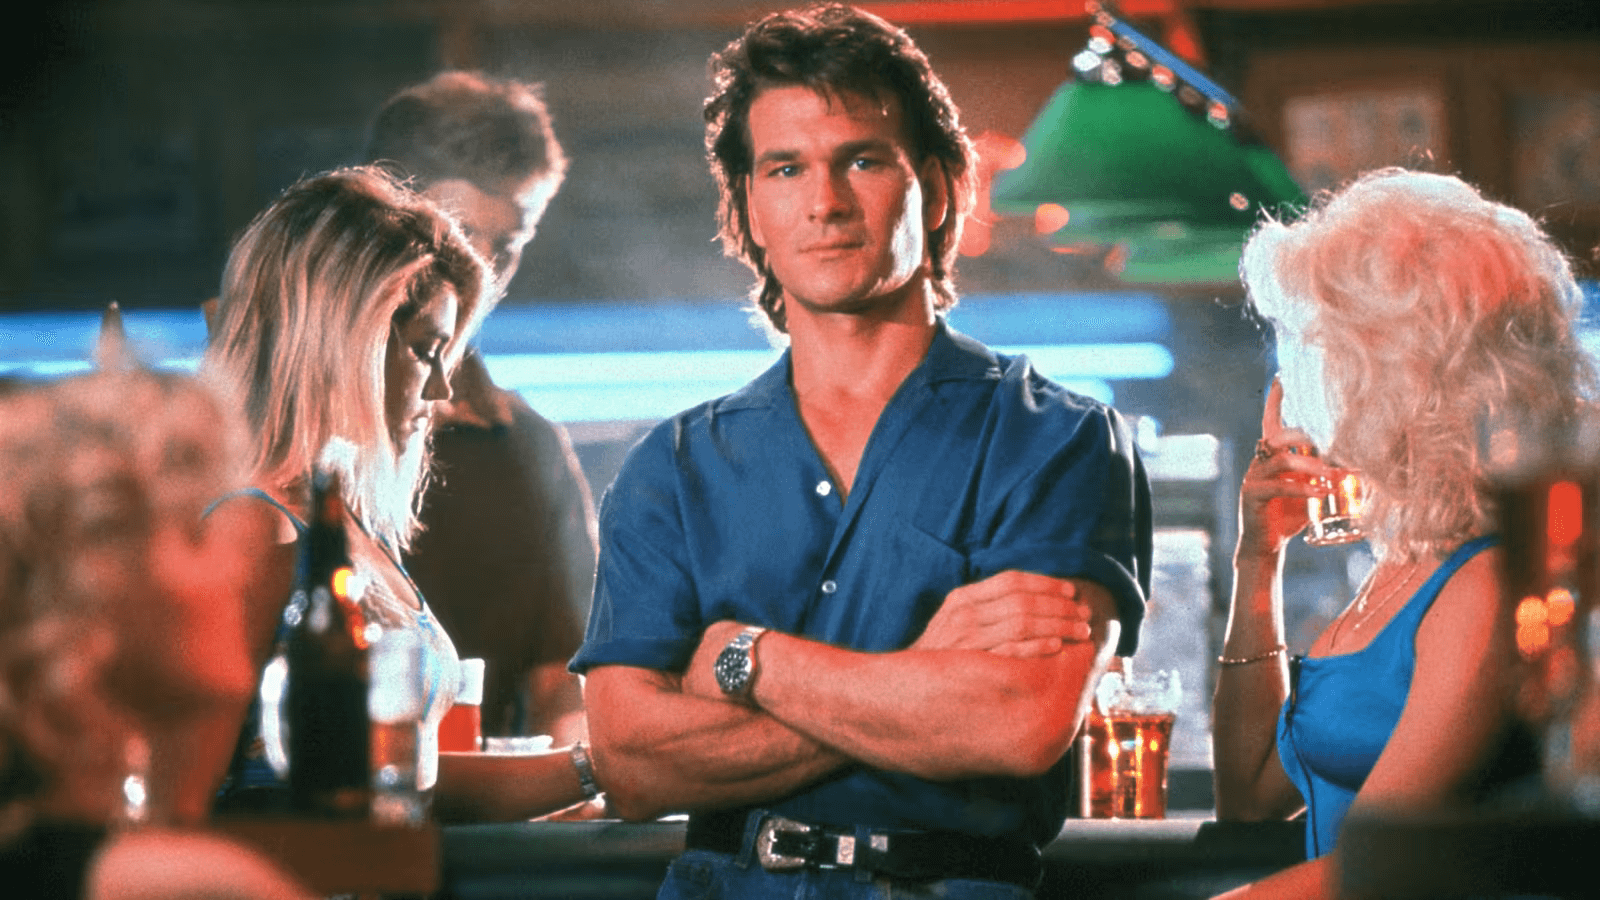 Patrick Swayze in Road House 1989